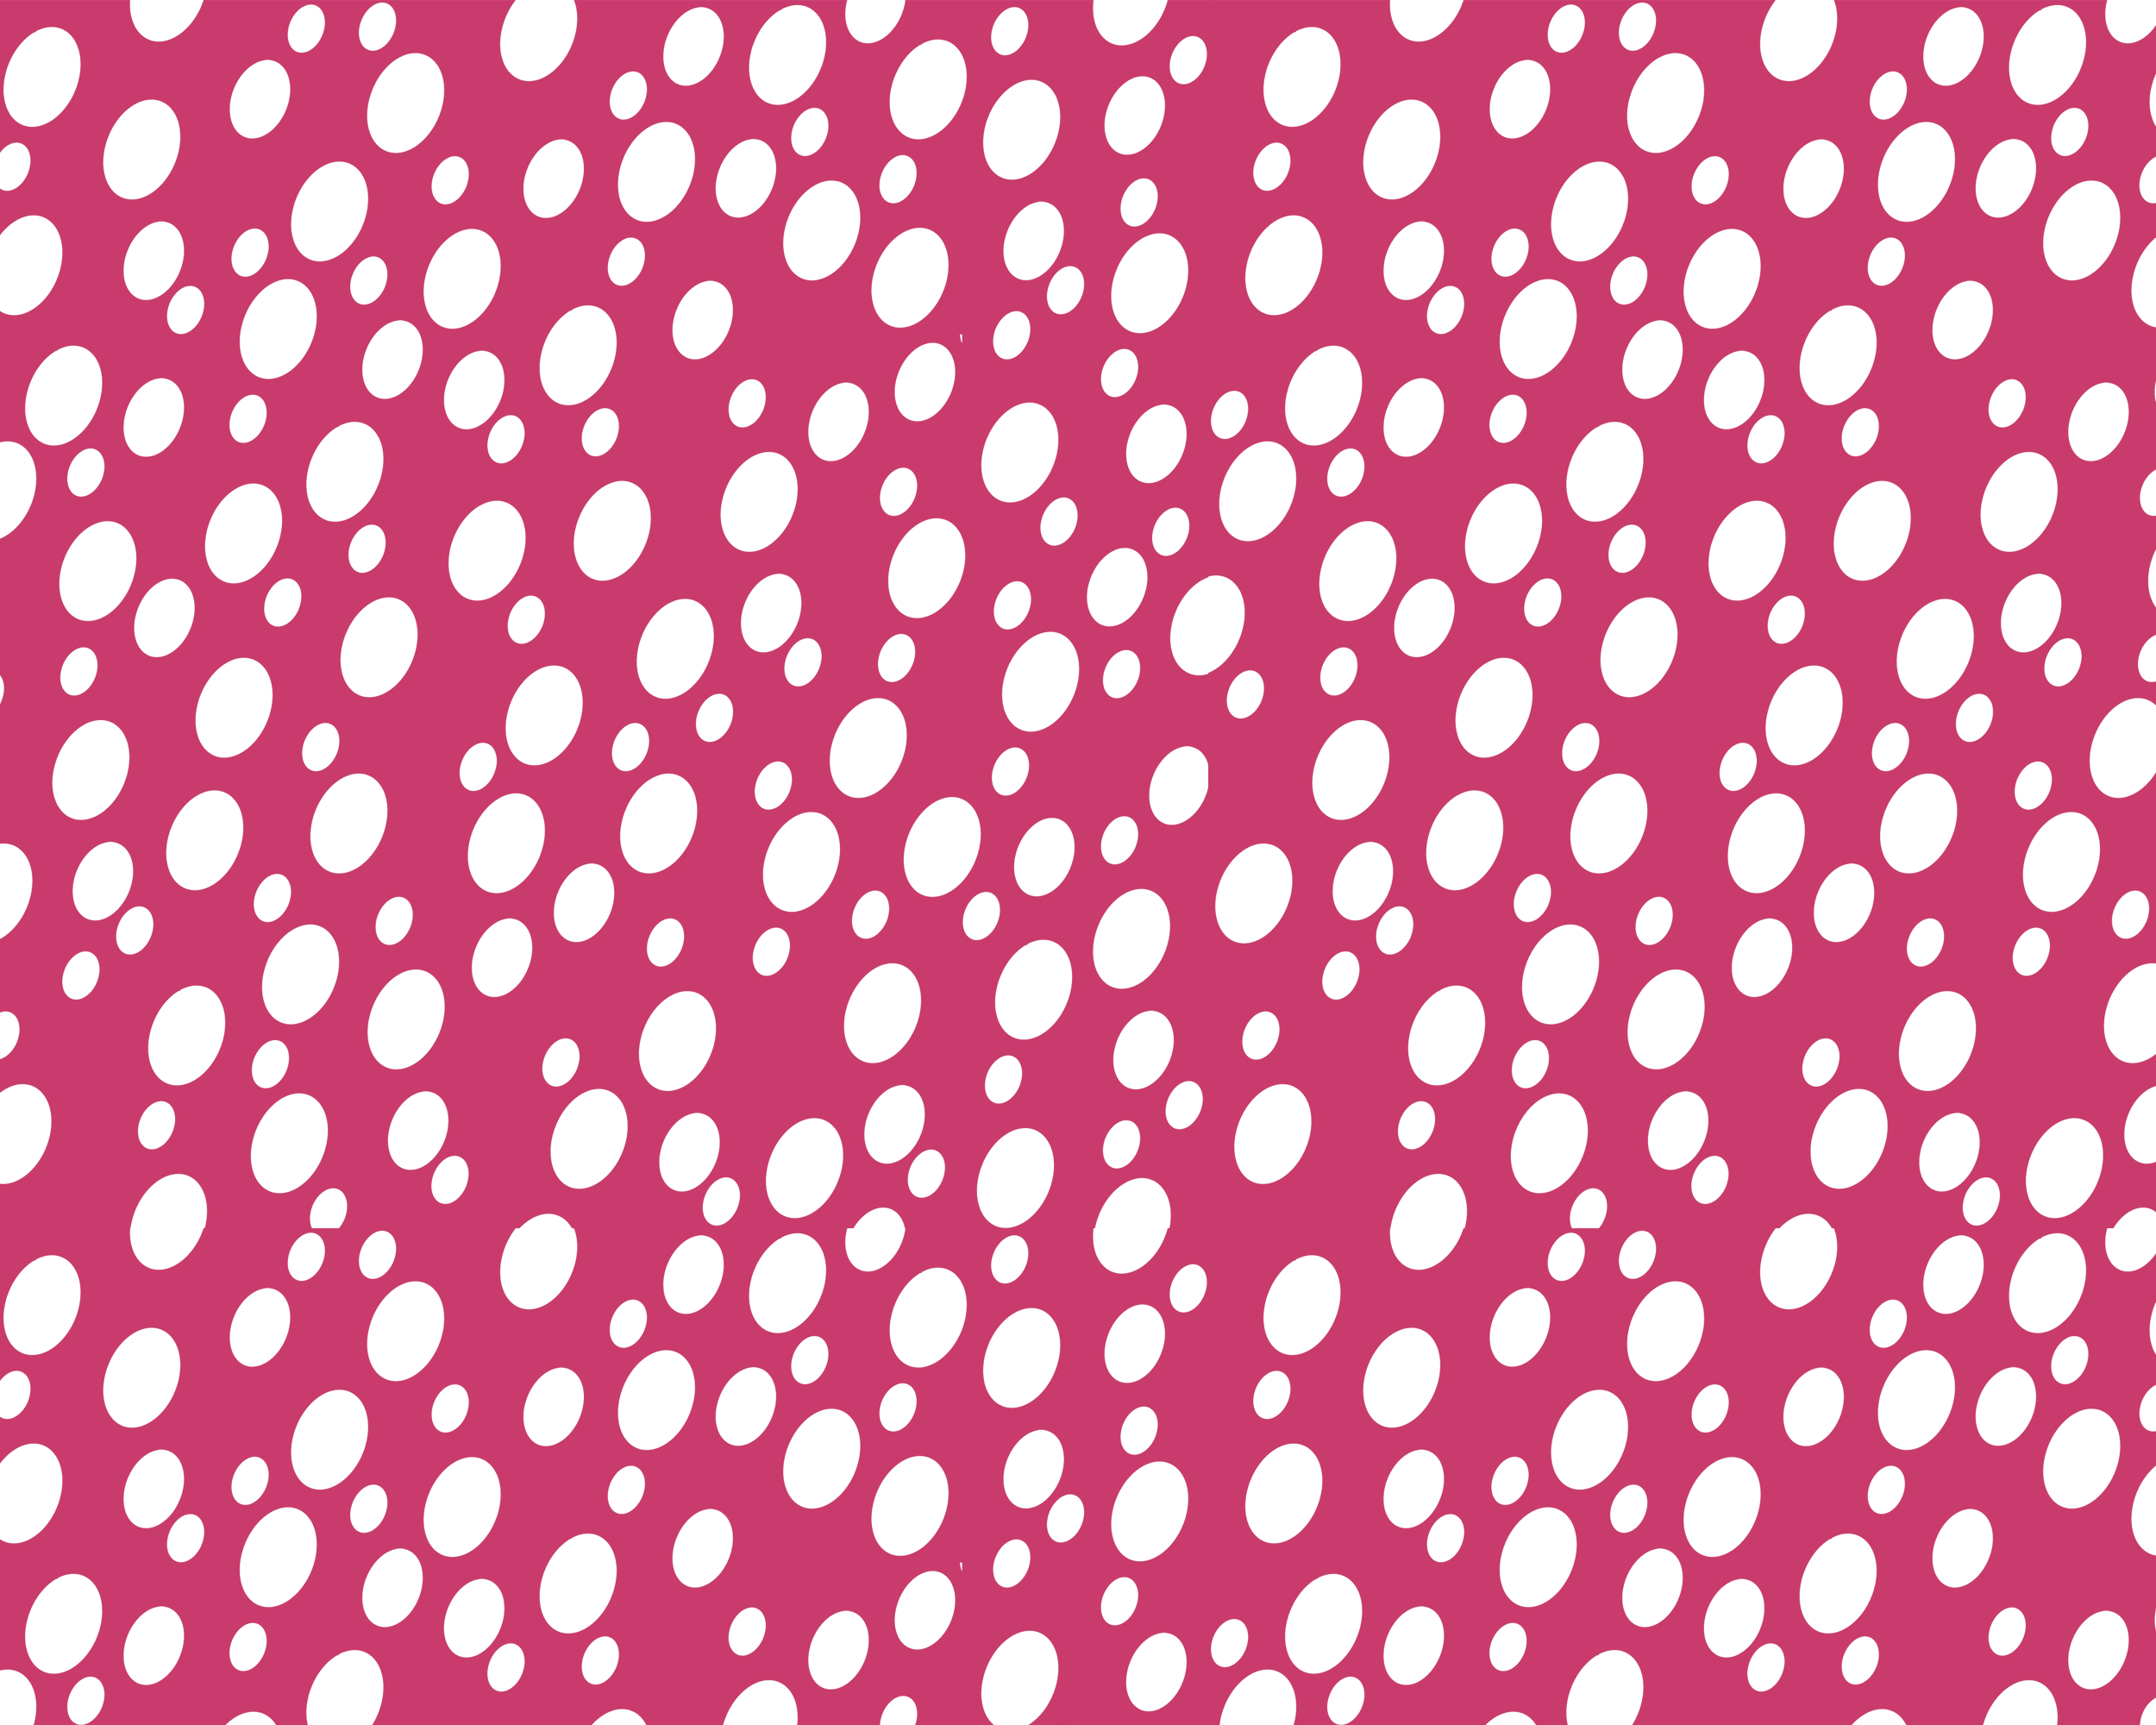 fascination dots pattern raspberry.png